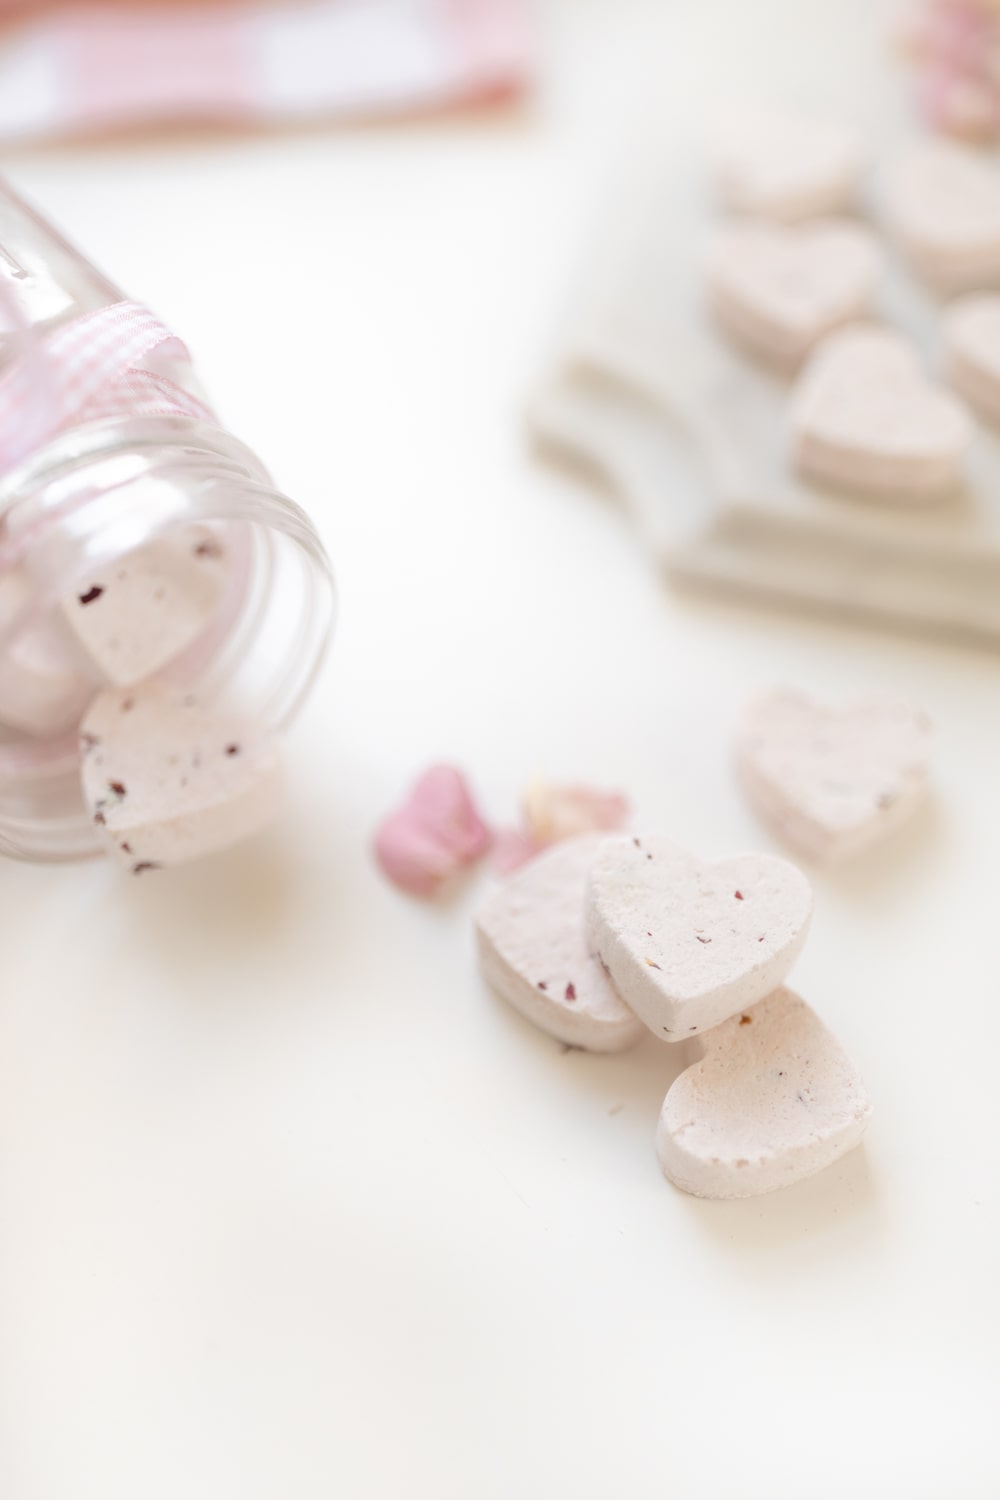 Pretty rose shower steamers tutorial from blogger Stephanie Ziajka on Diary of a Debutante